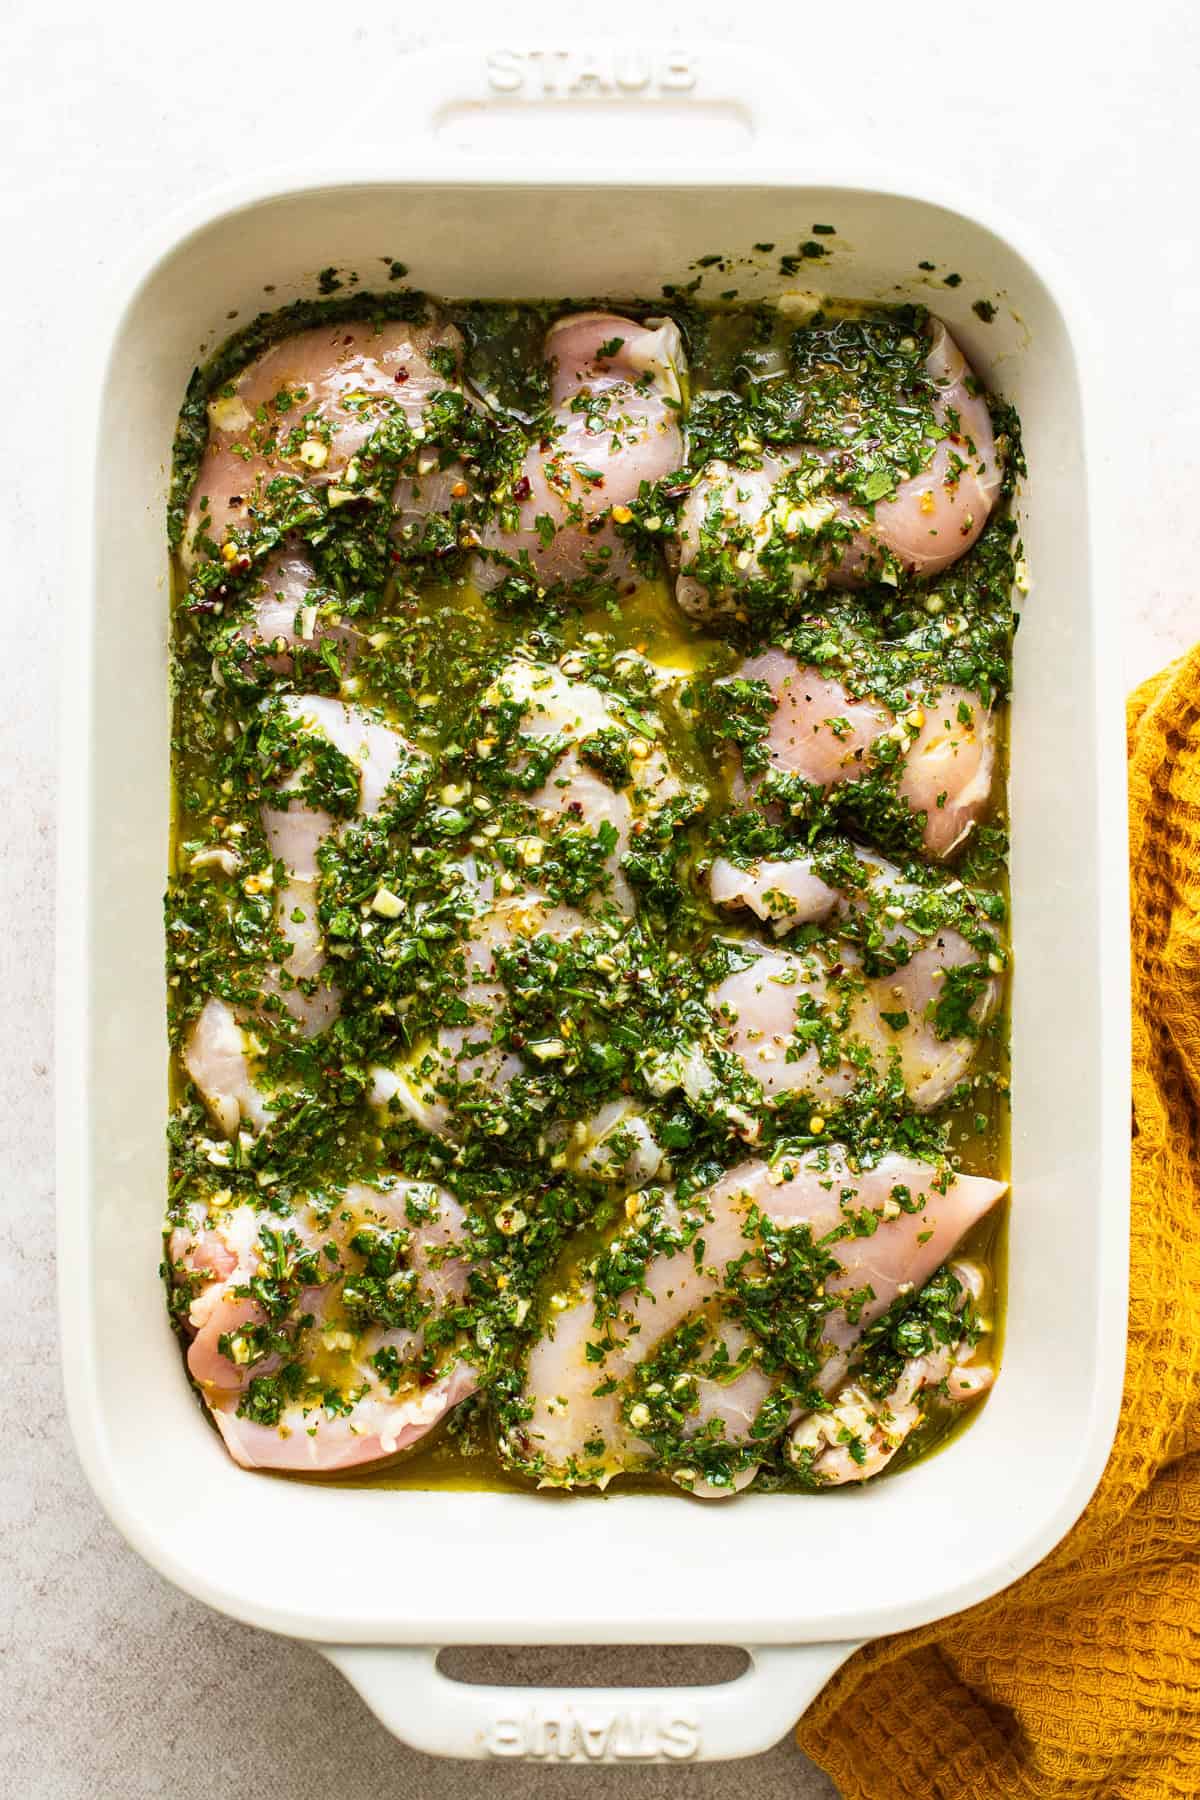 Chicken thighs in a dish covered in the chimichurri sauce ready to marinate